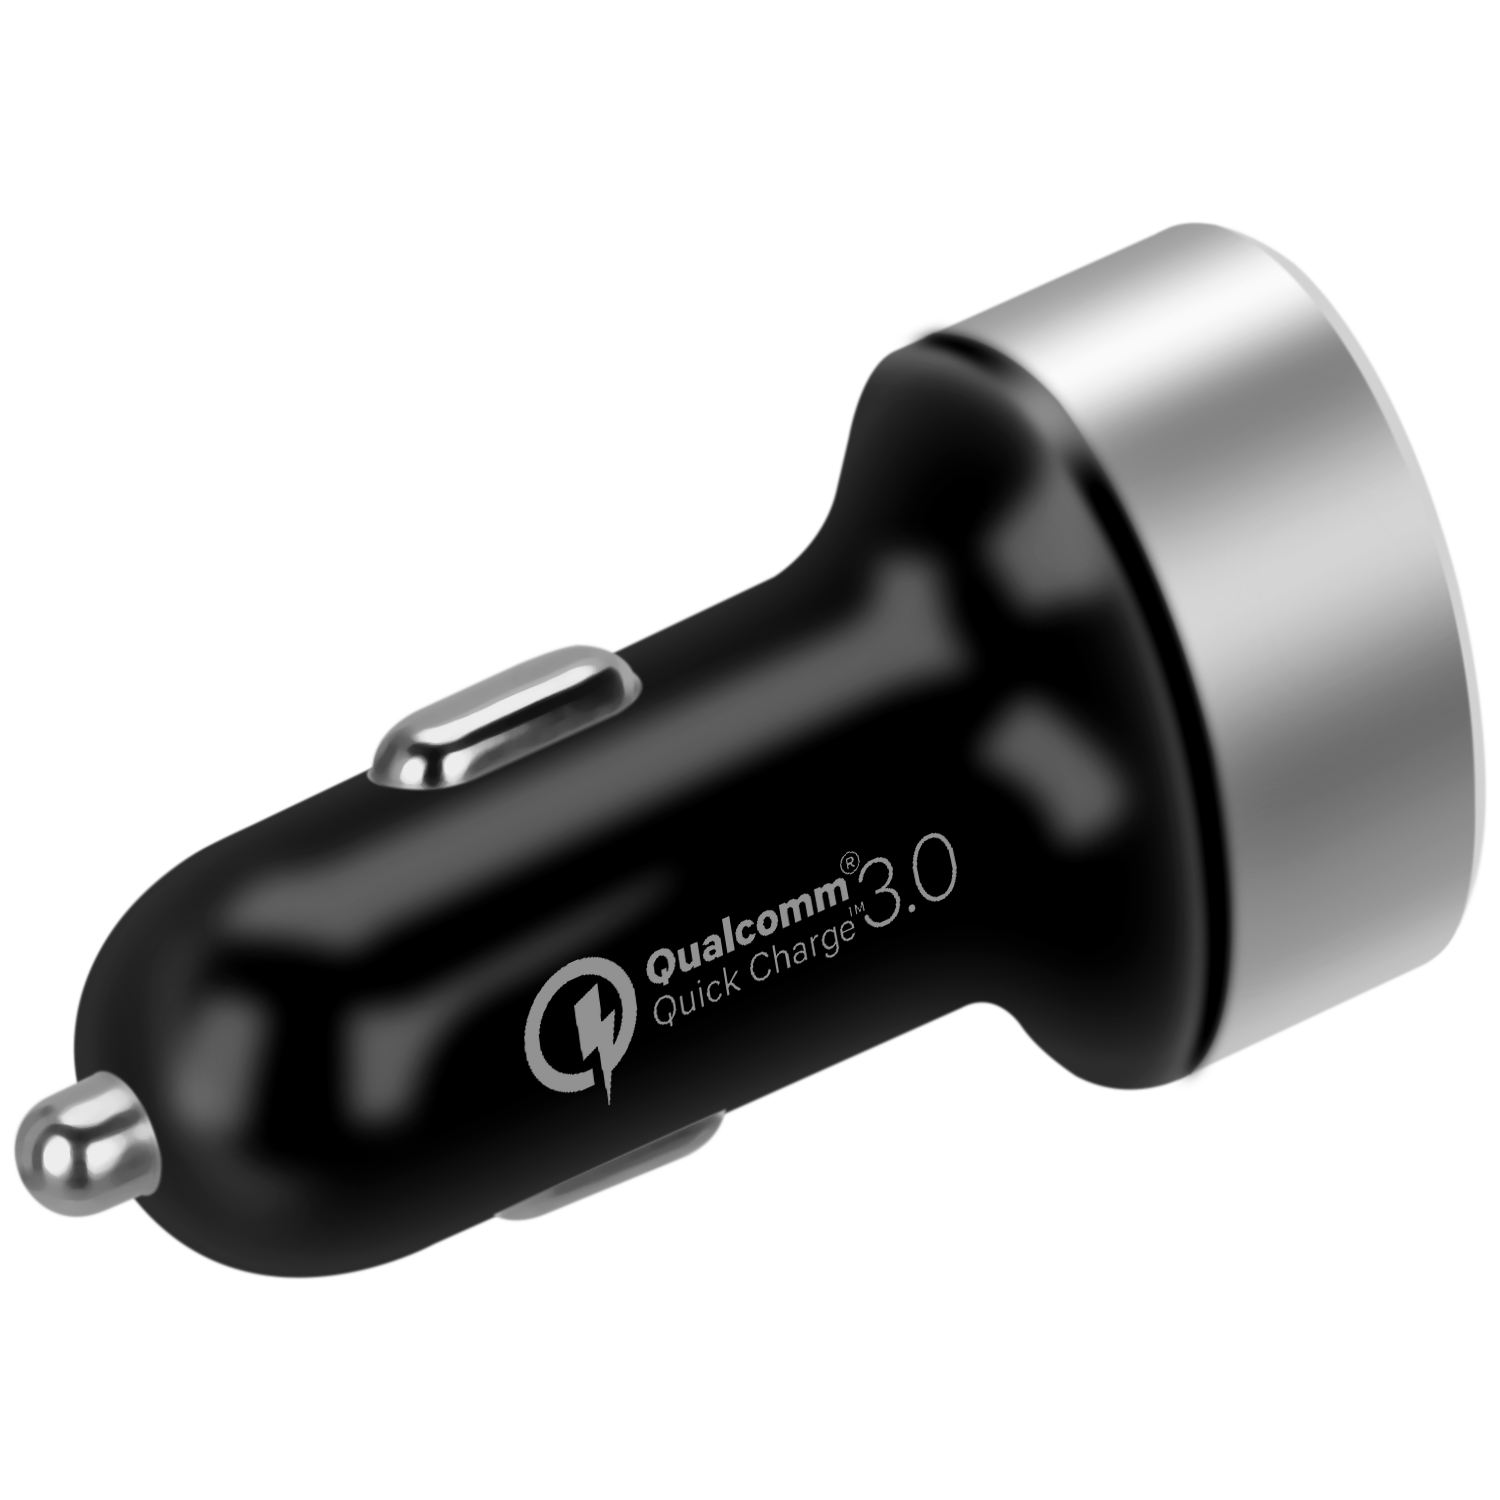 Momax UC Series Dual Port Fast Car Charger